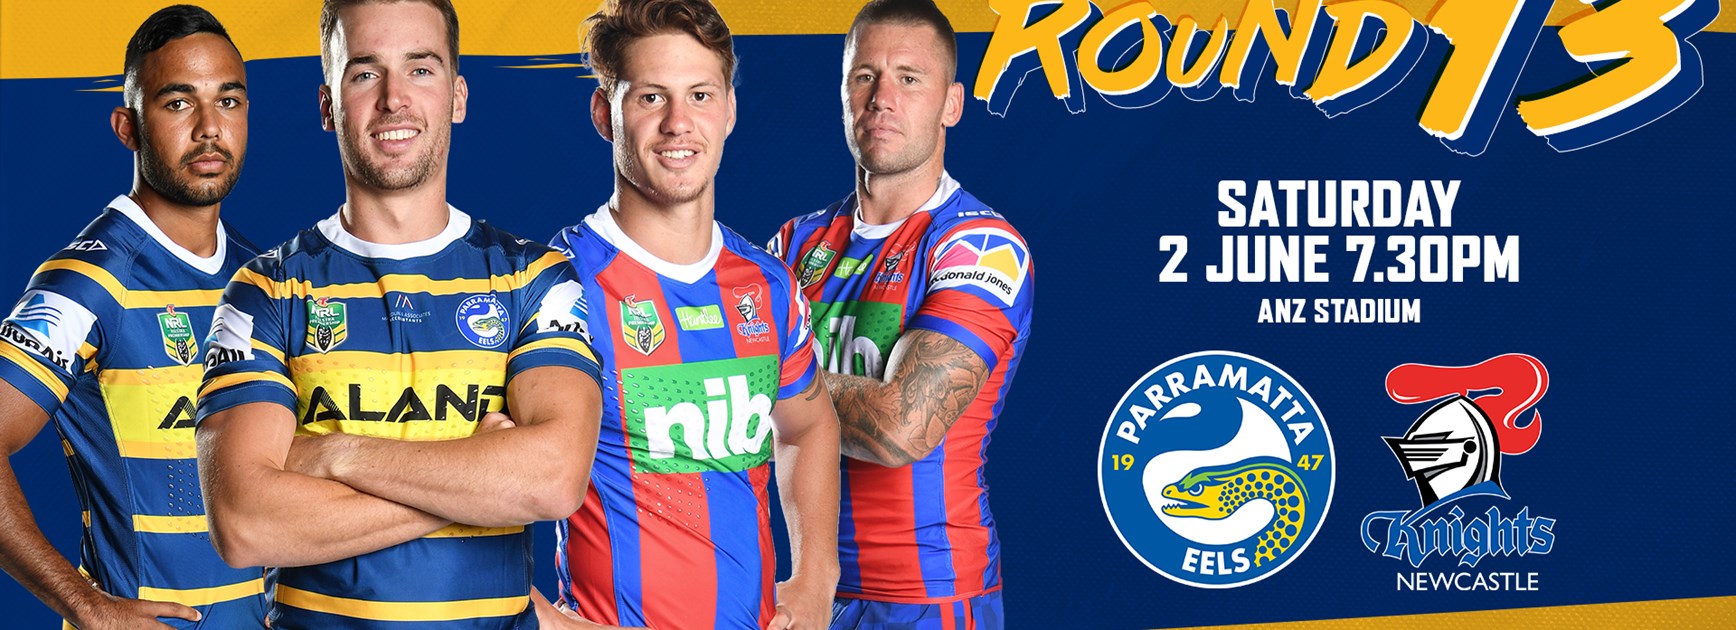 Eels v Knights, Round 13 Match Preview